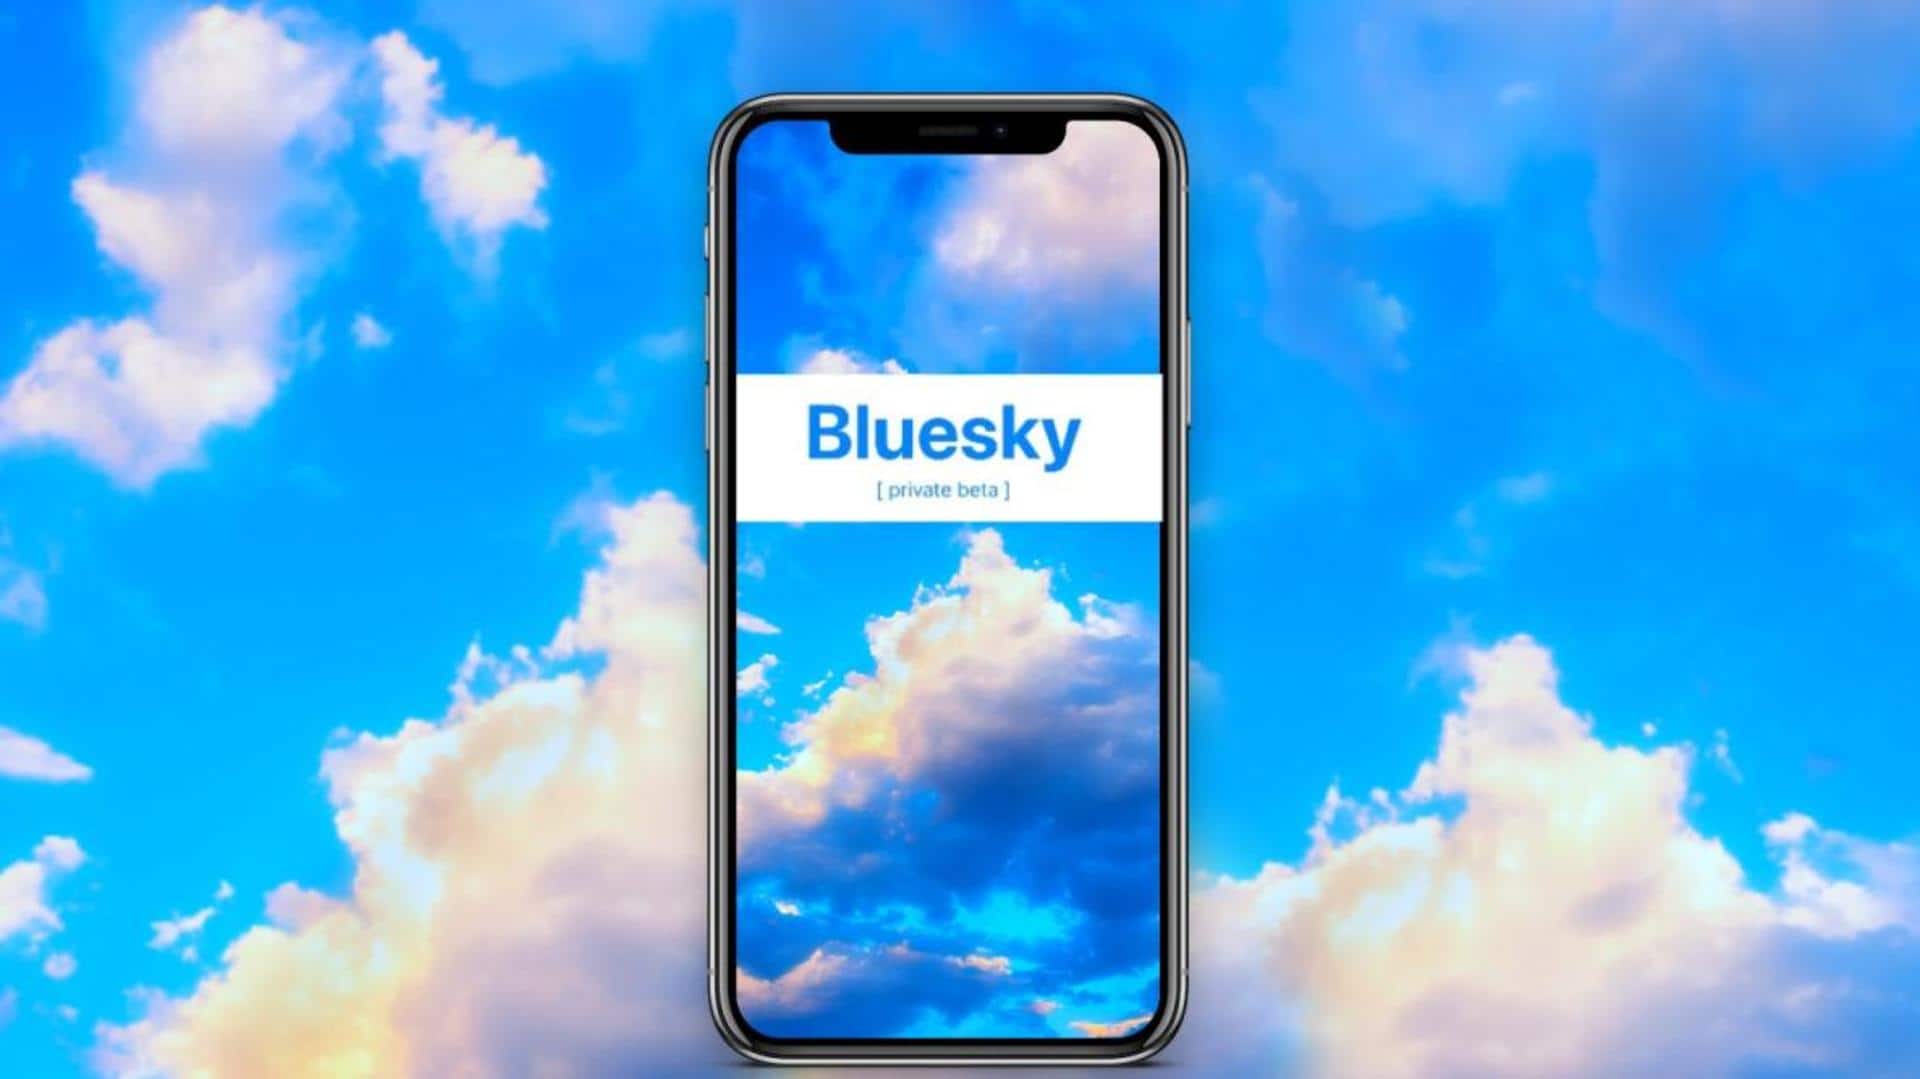 How does Twitter-rival Bluesky plan to implement content moderation